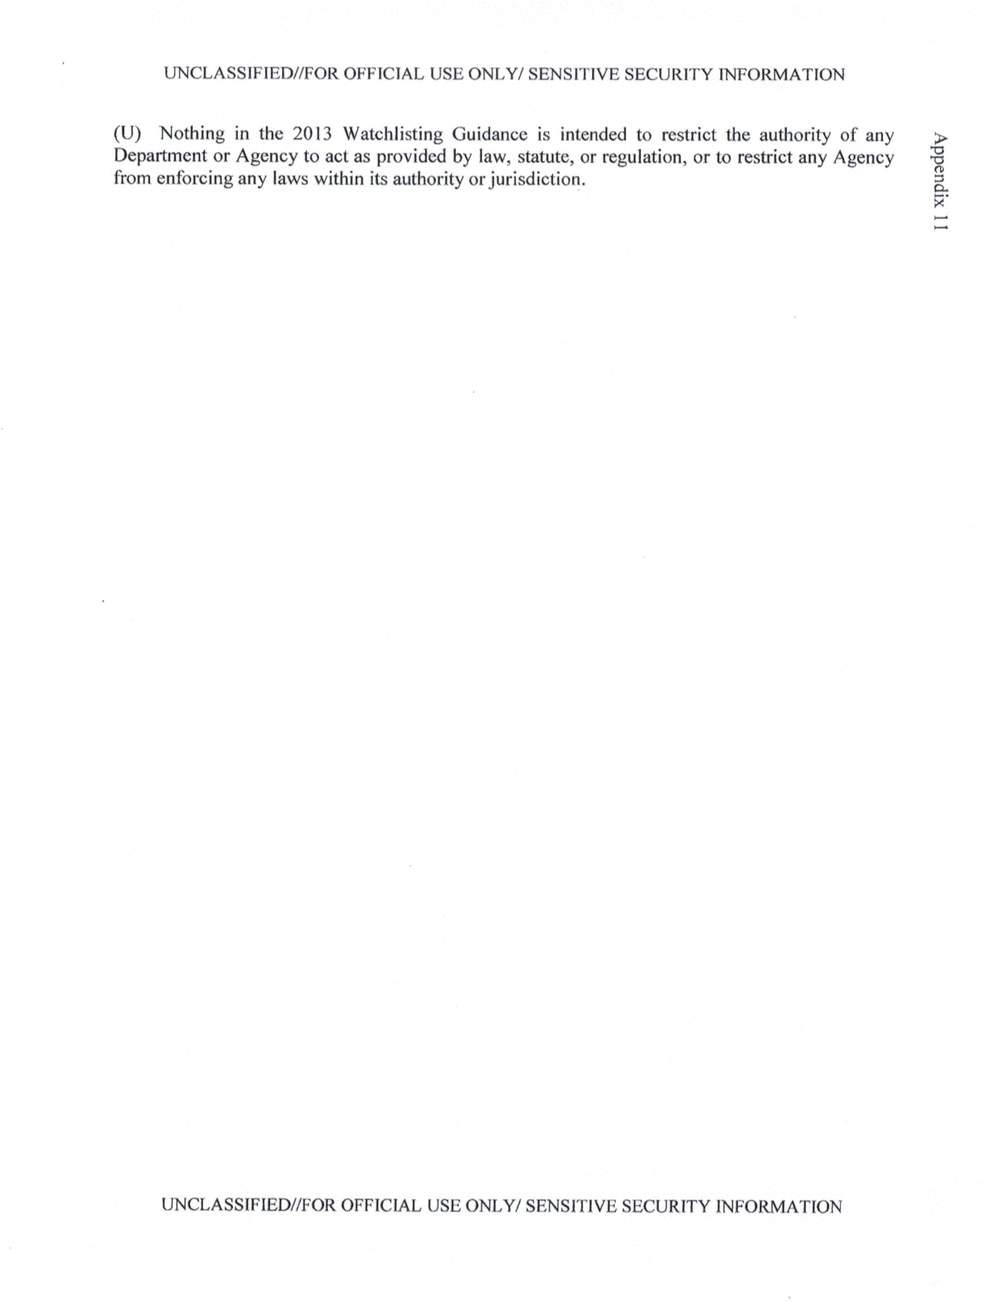 Page 165 from March 2013 Watchlisting Guidance